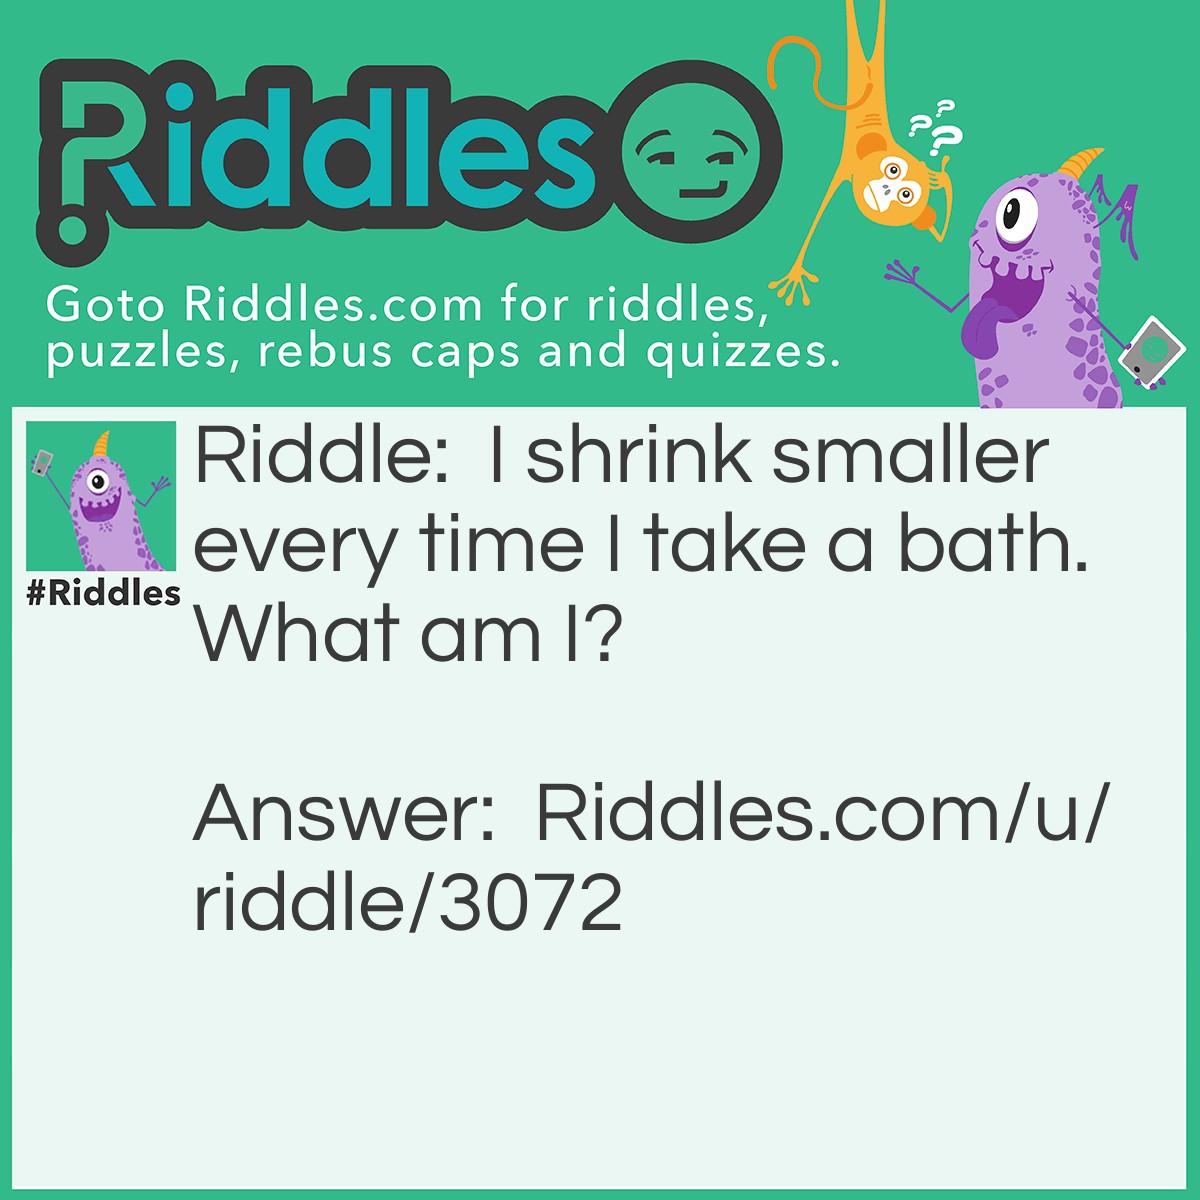 Riddle: I shrink smaller every time I take a bath. What am I? Answer: Soap.